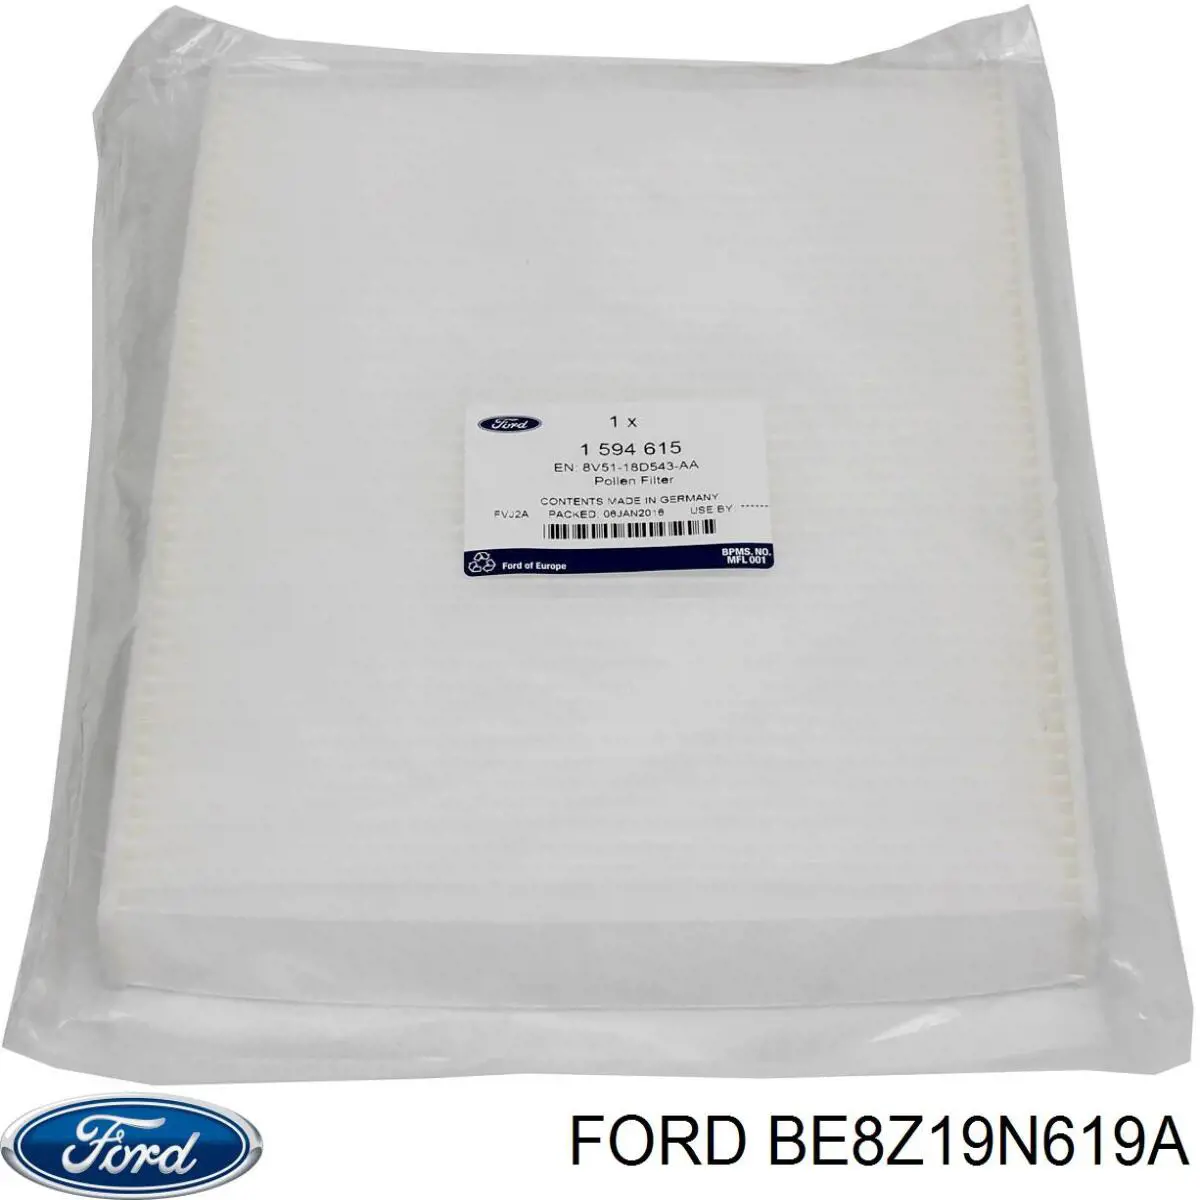 BE8Z19N619A Ford filtro habitáculo